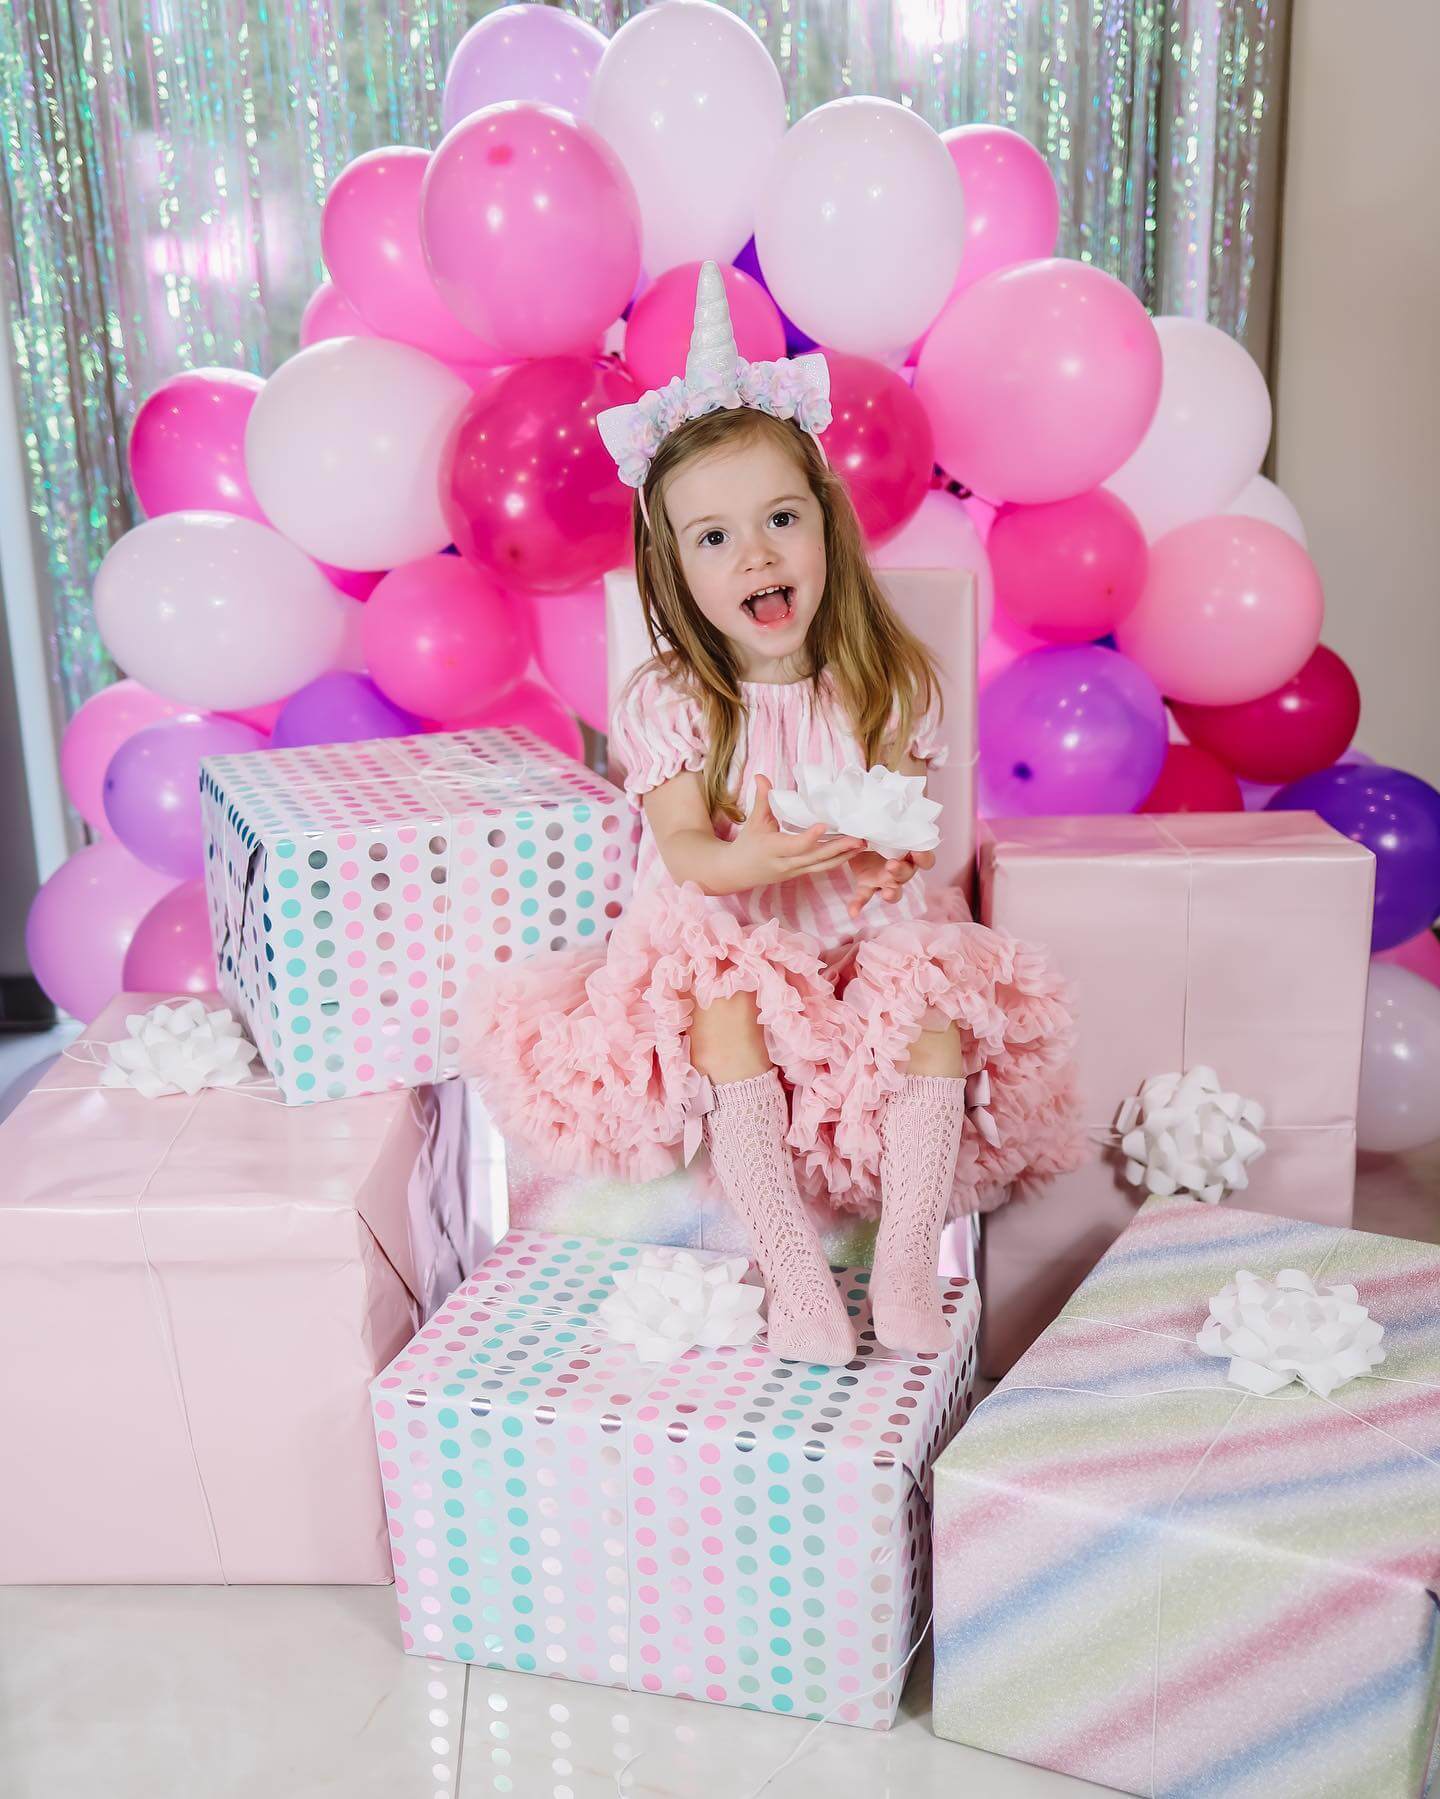 5 original gift and party ideas for baby